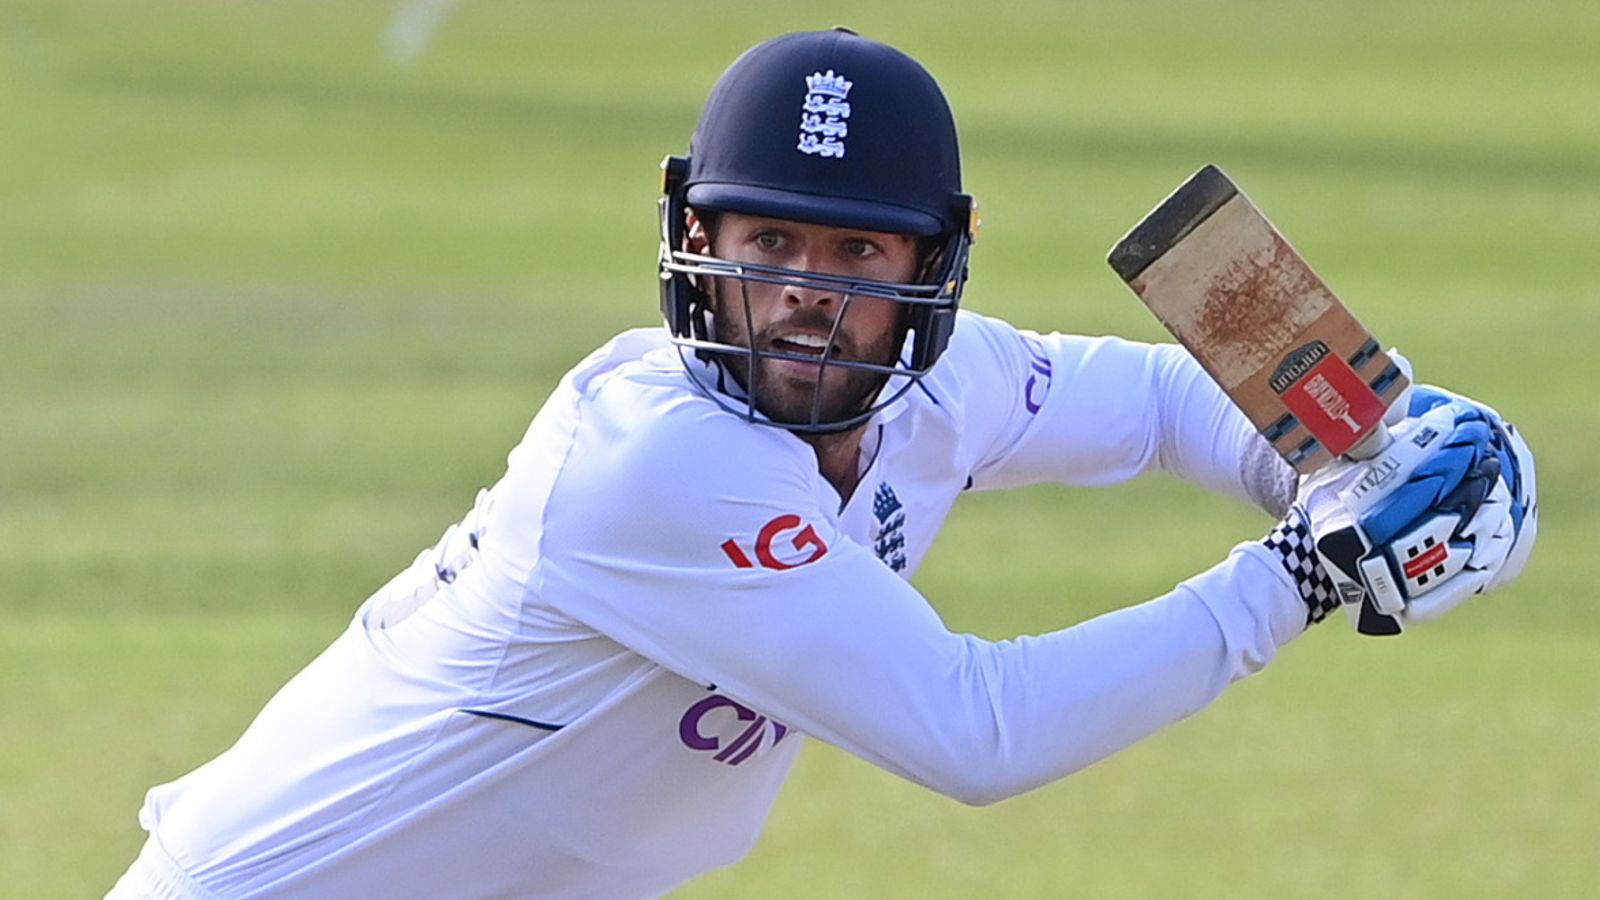 Ben Foakes: England wicketkeeper needs runs to secure spot long-term and Lord’s was a good start